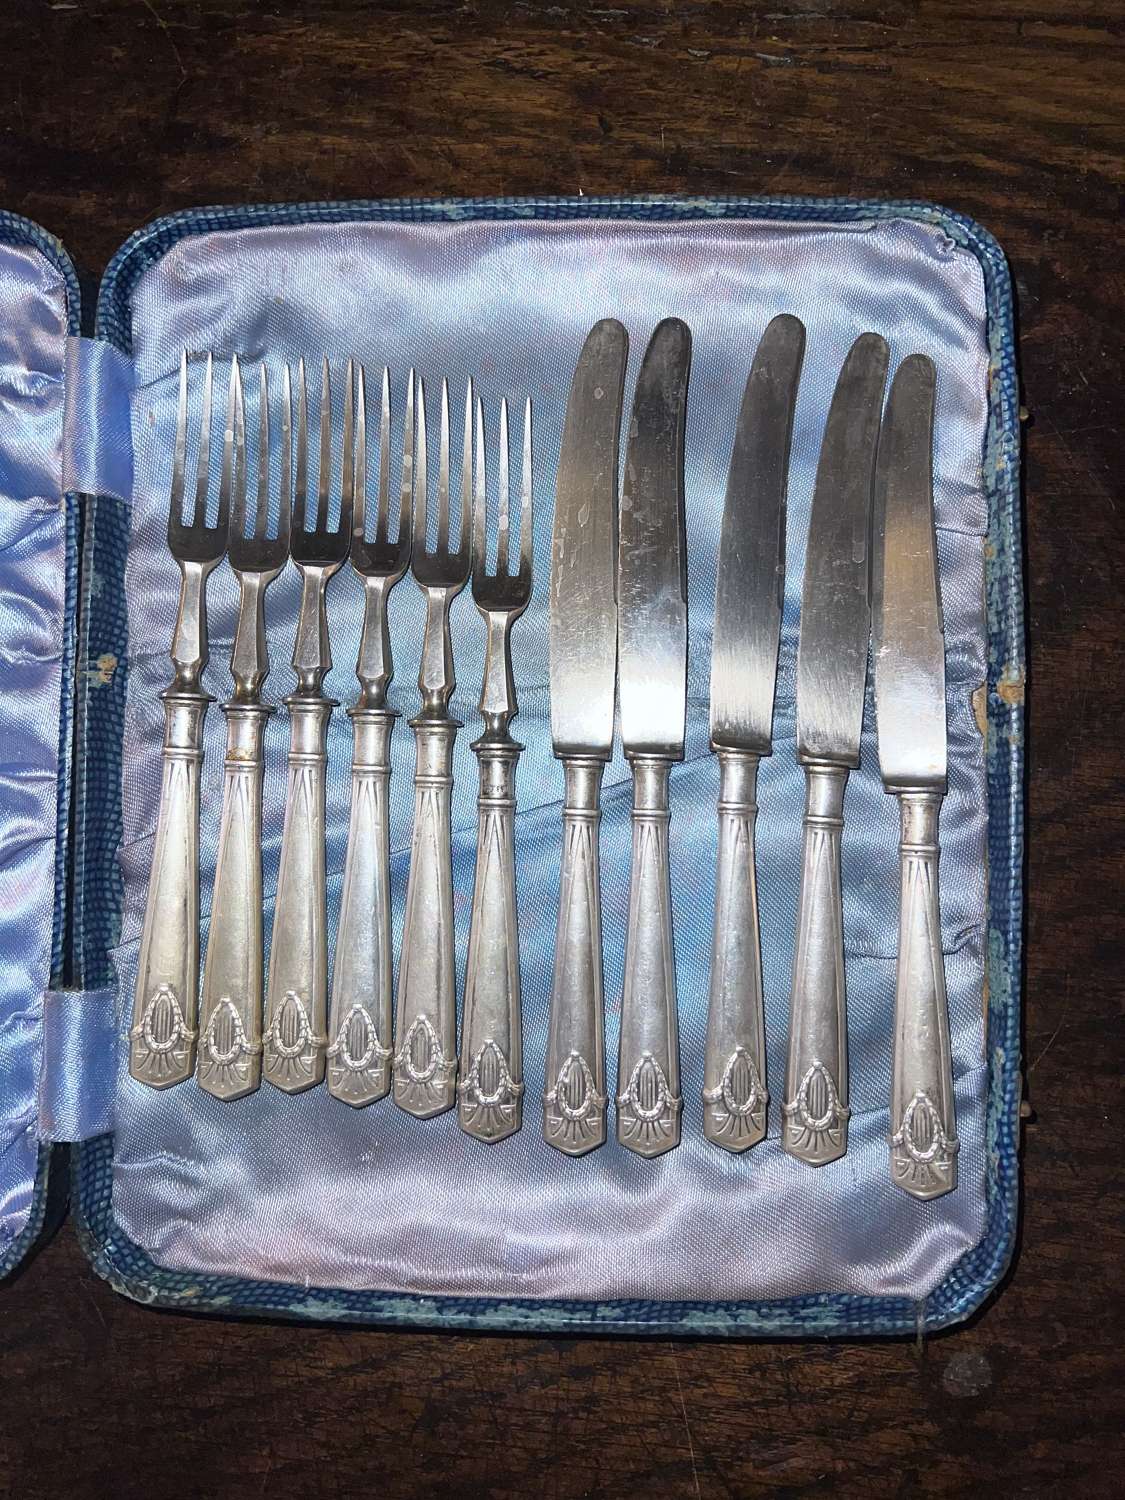 Continental pastry knife and forks